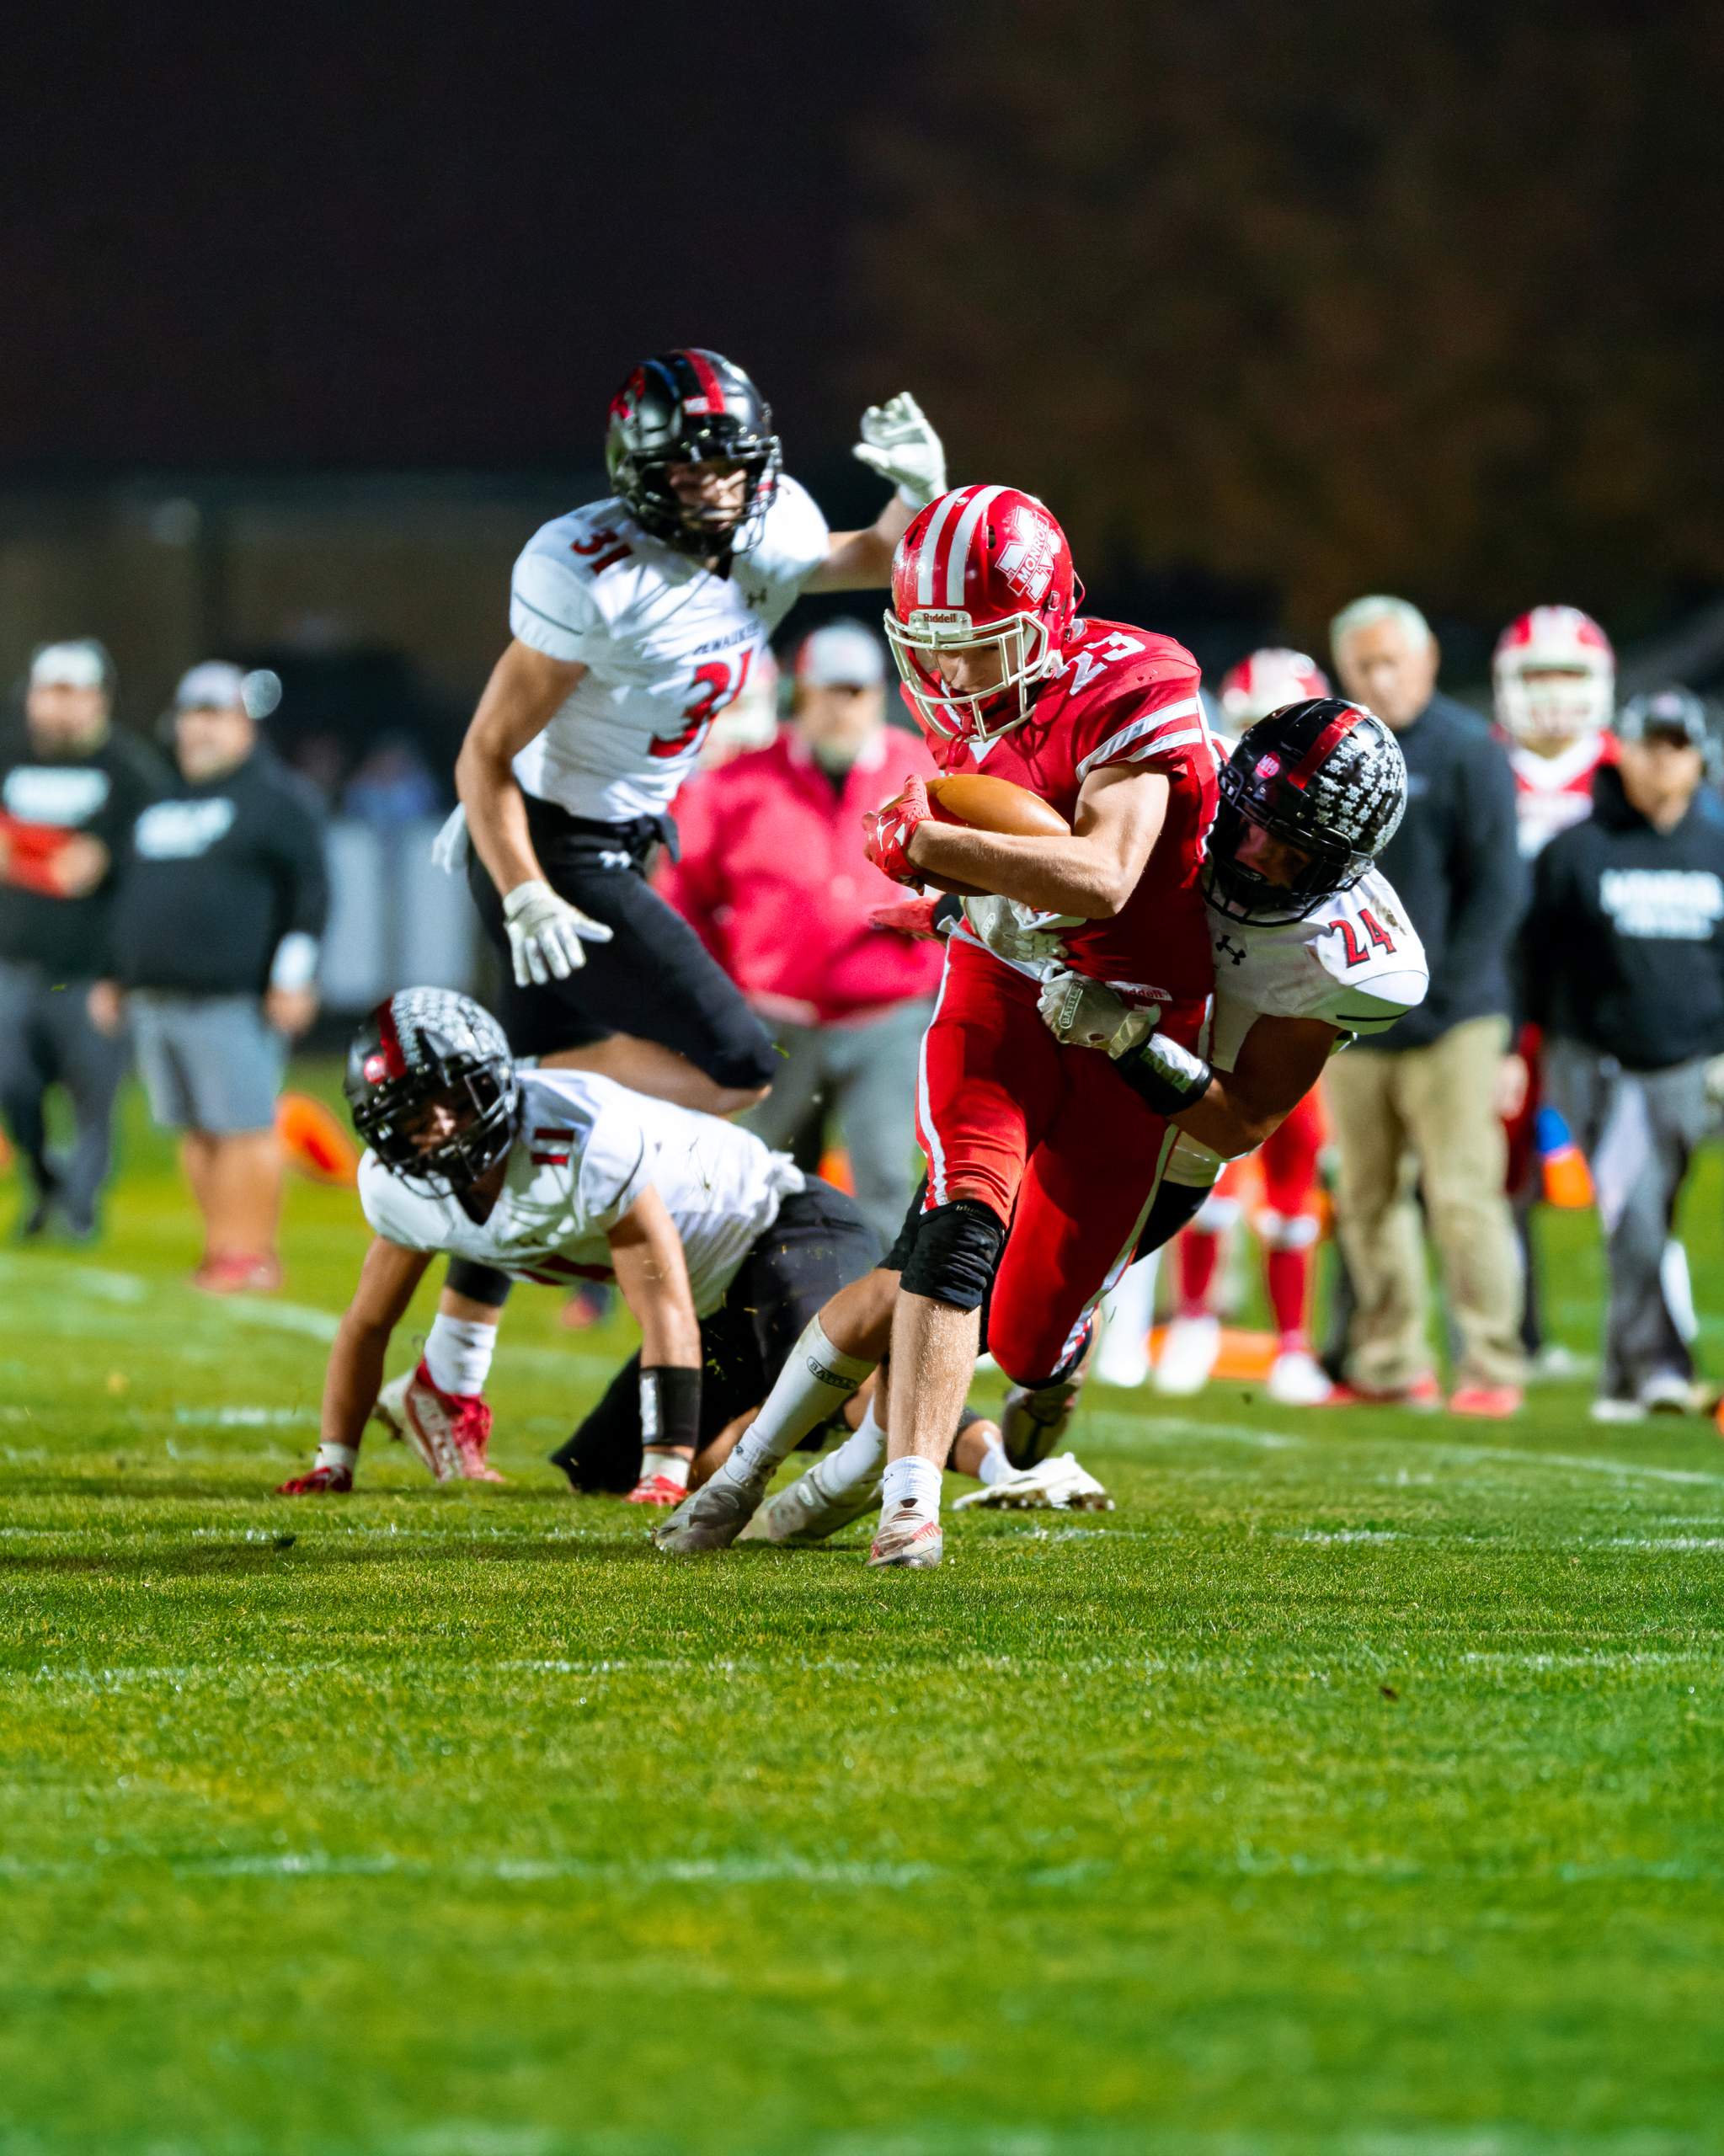 Monroe vs. Pewaukee, Round 2 of the 2022 WIAA Playoffs, photography by Ross Harried for Second Crop Sports